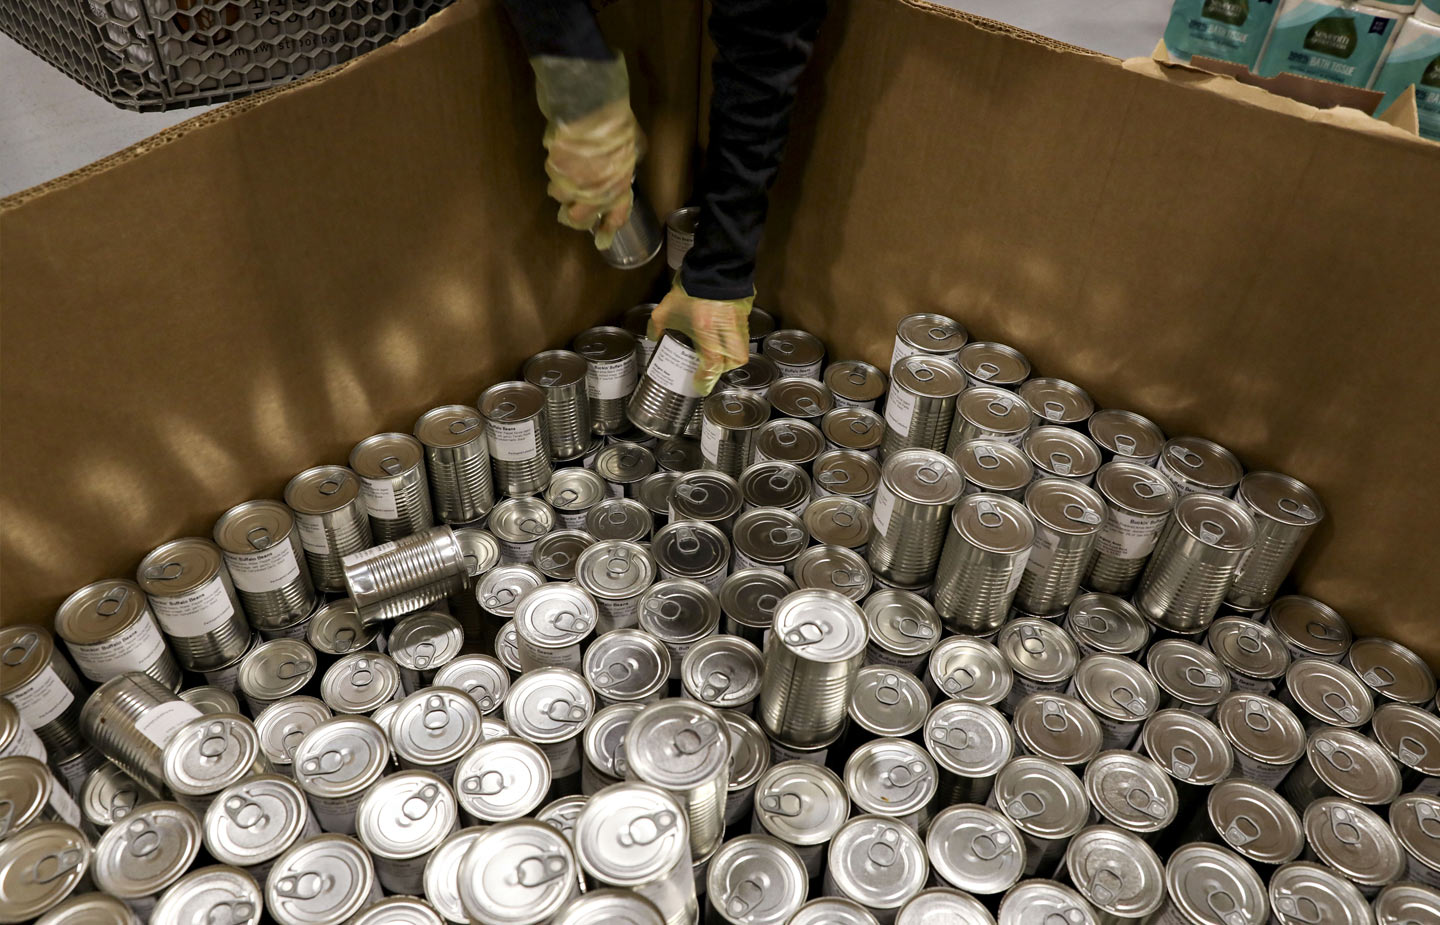 Image of cans being unloaded from a delivery box